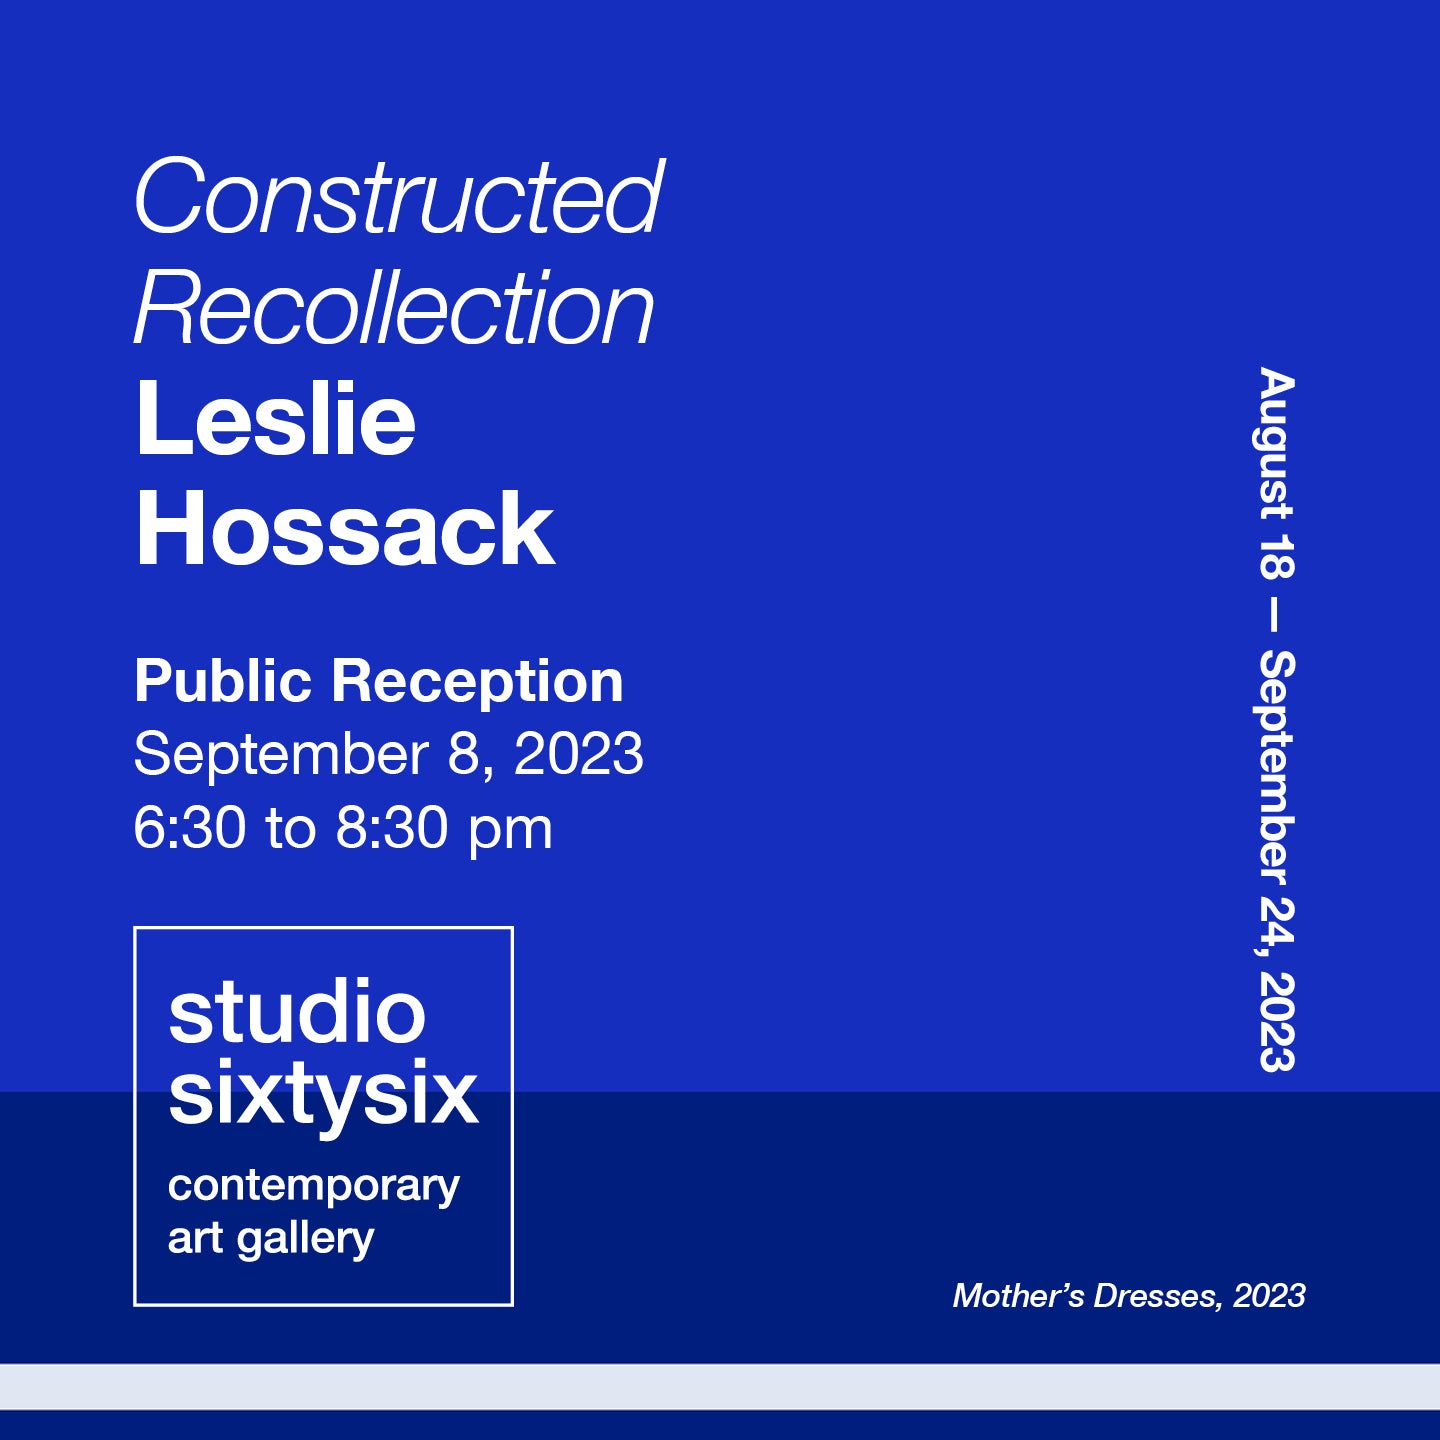 Public Reception: Constructed Recollection